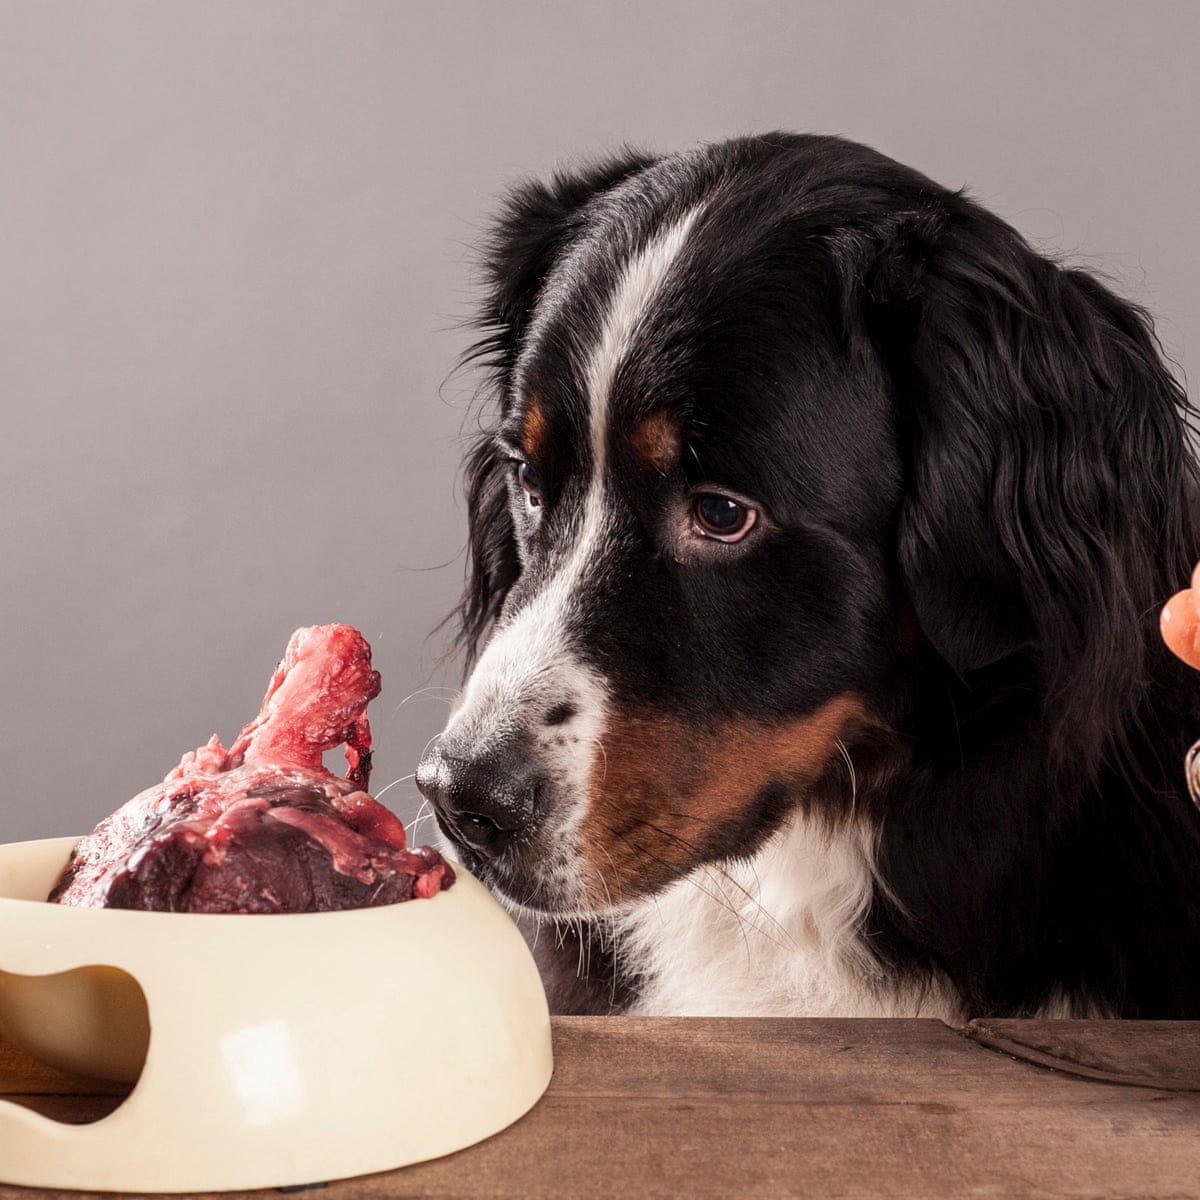 Scientists criticise trend for raw meat pet food after analysis finds pathogens | Microbiology | The Guardian